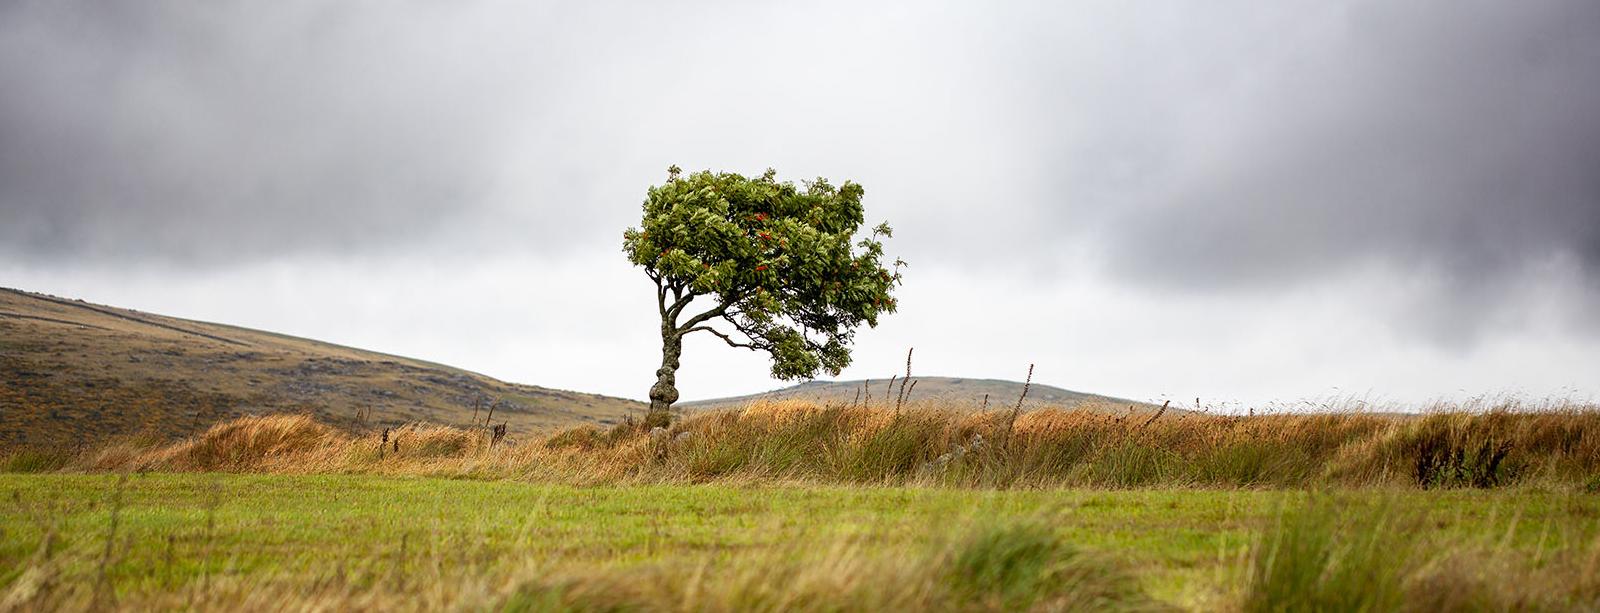 tree in the middle of an open field